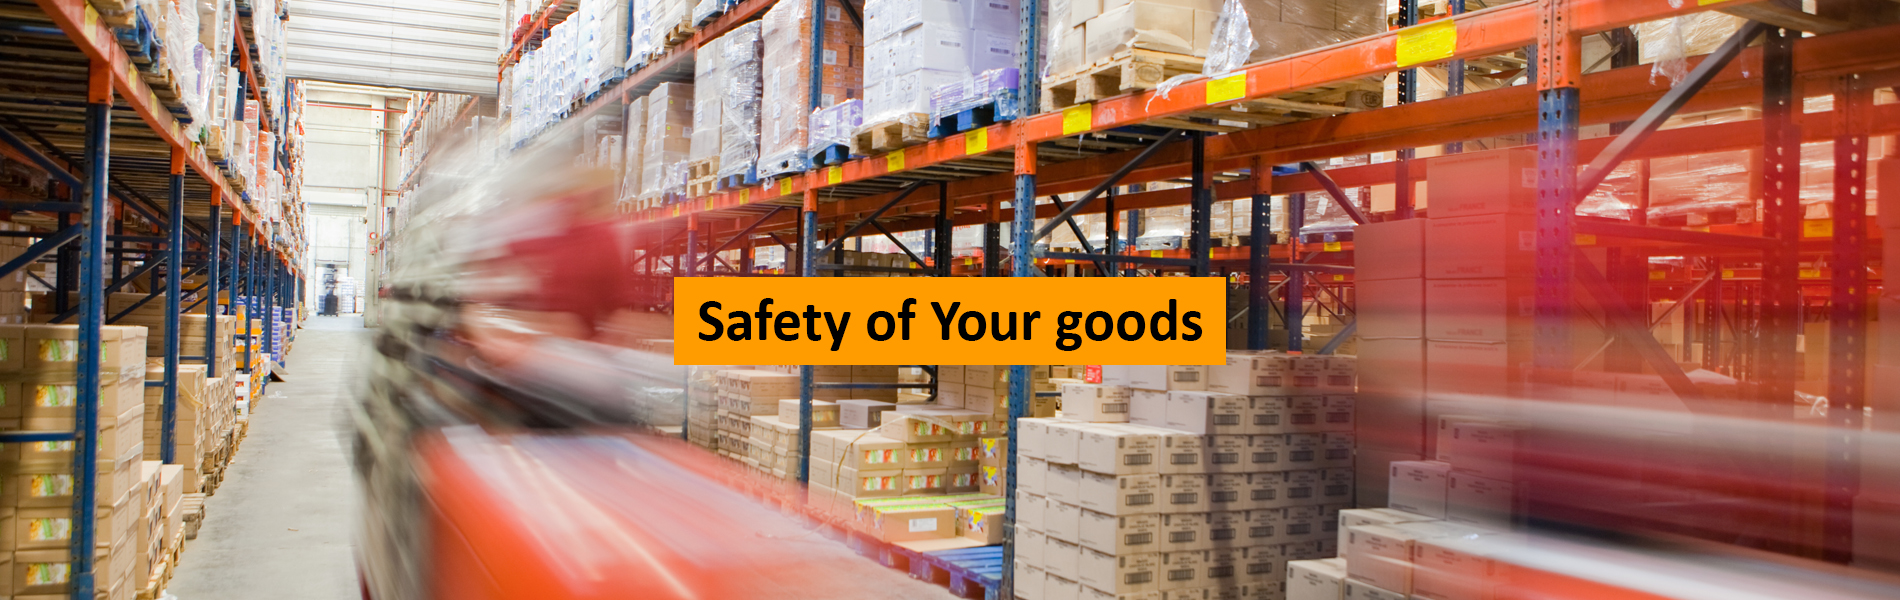 Safety of Your goods